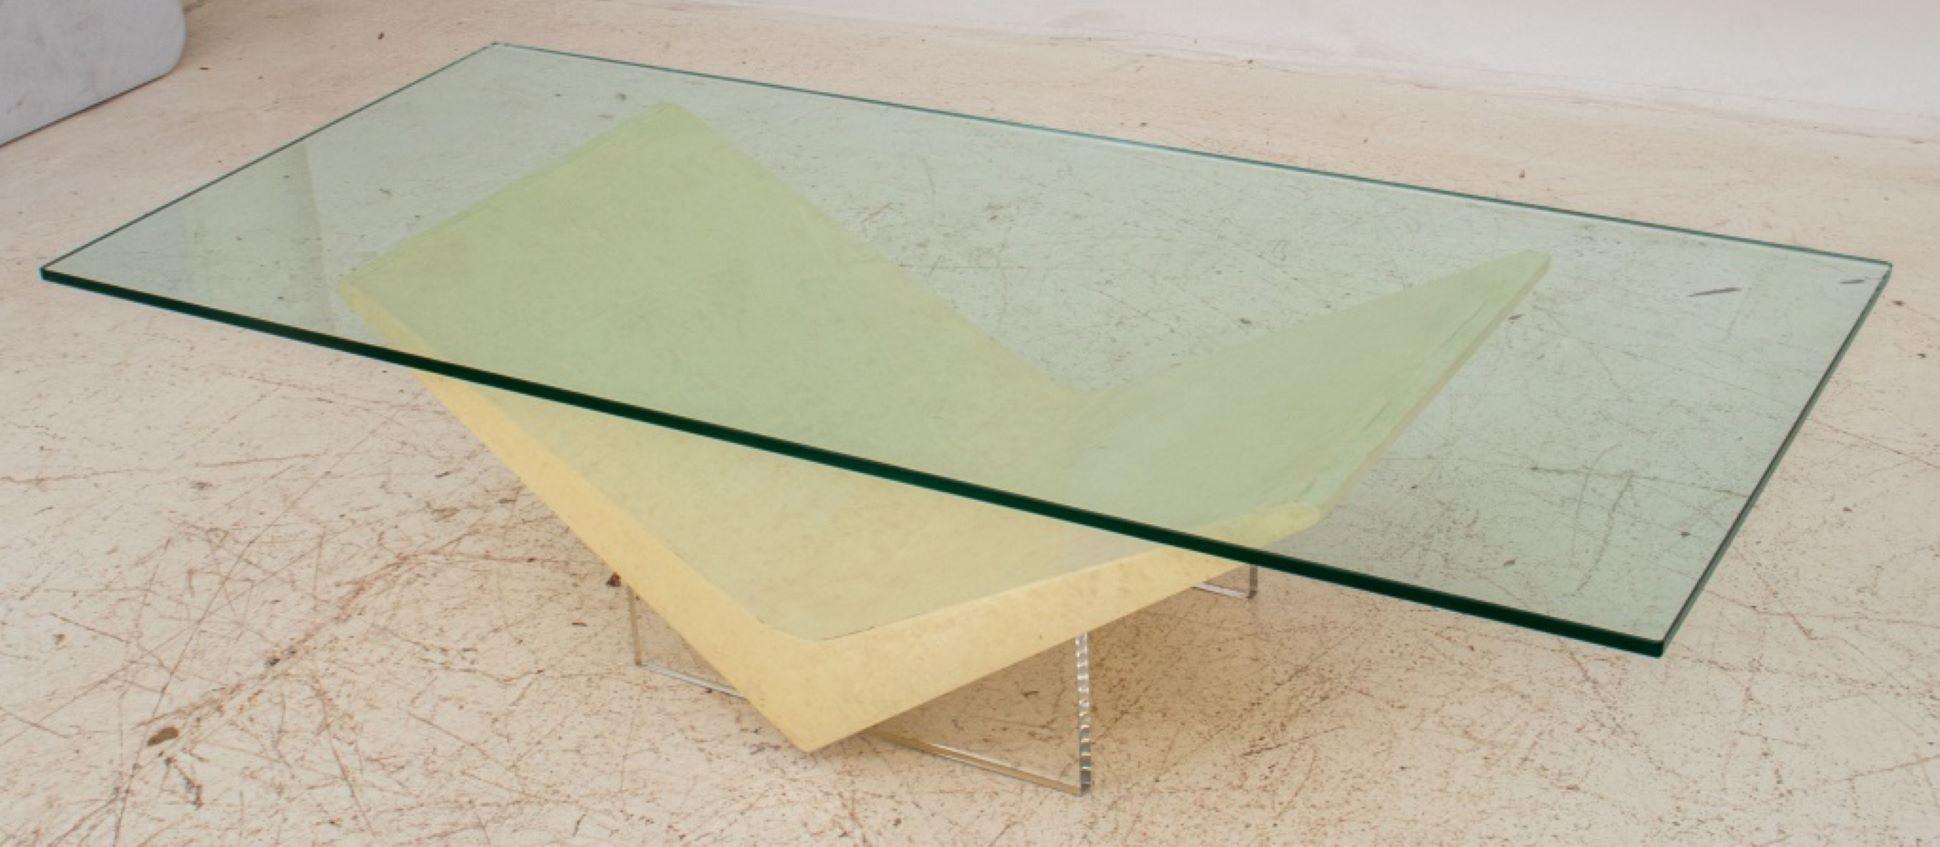 Gampel-Stoll Faux Parchment Coffee Table, 1980s In Good Condition For Sale In New York, NY